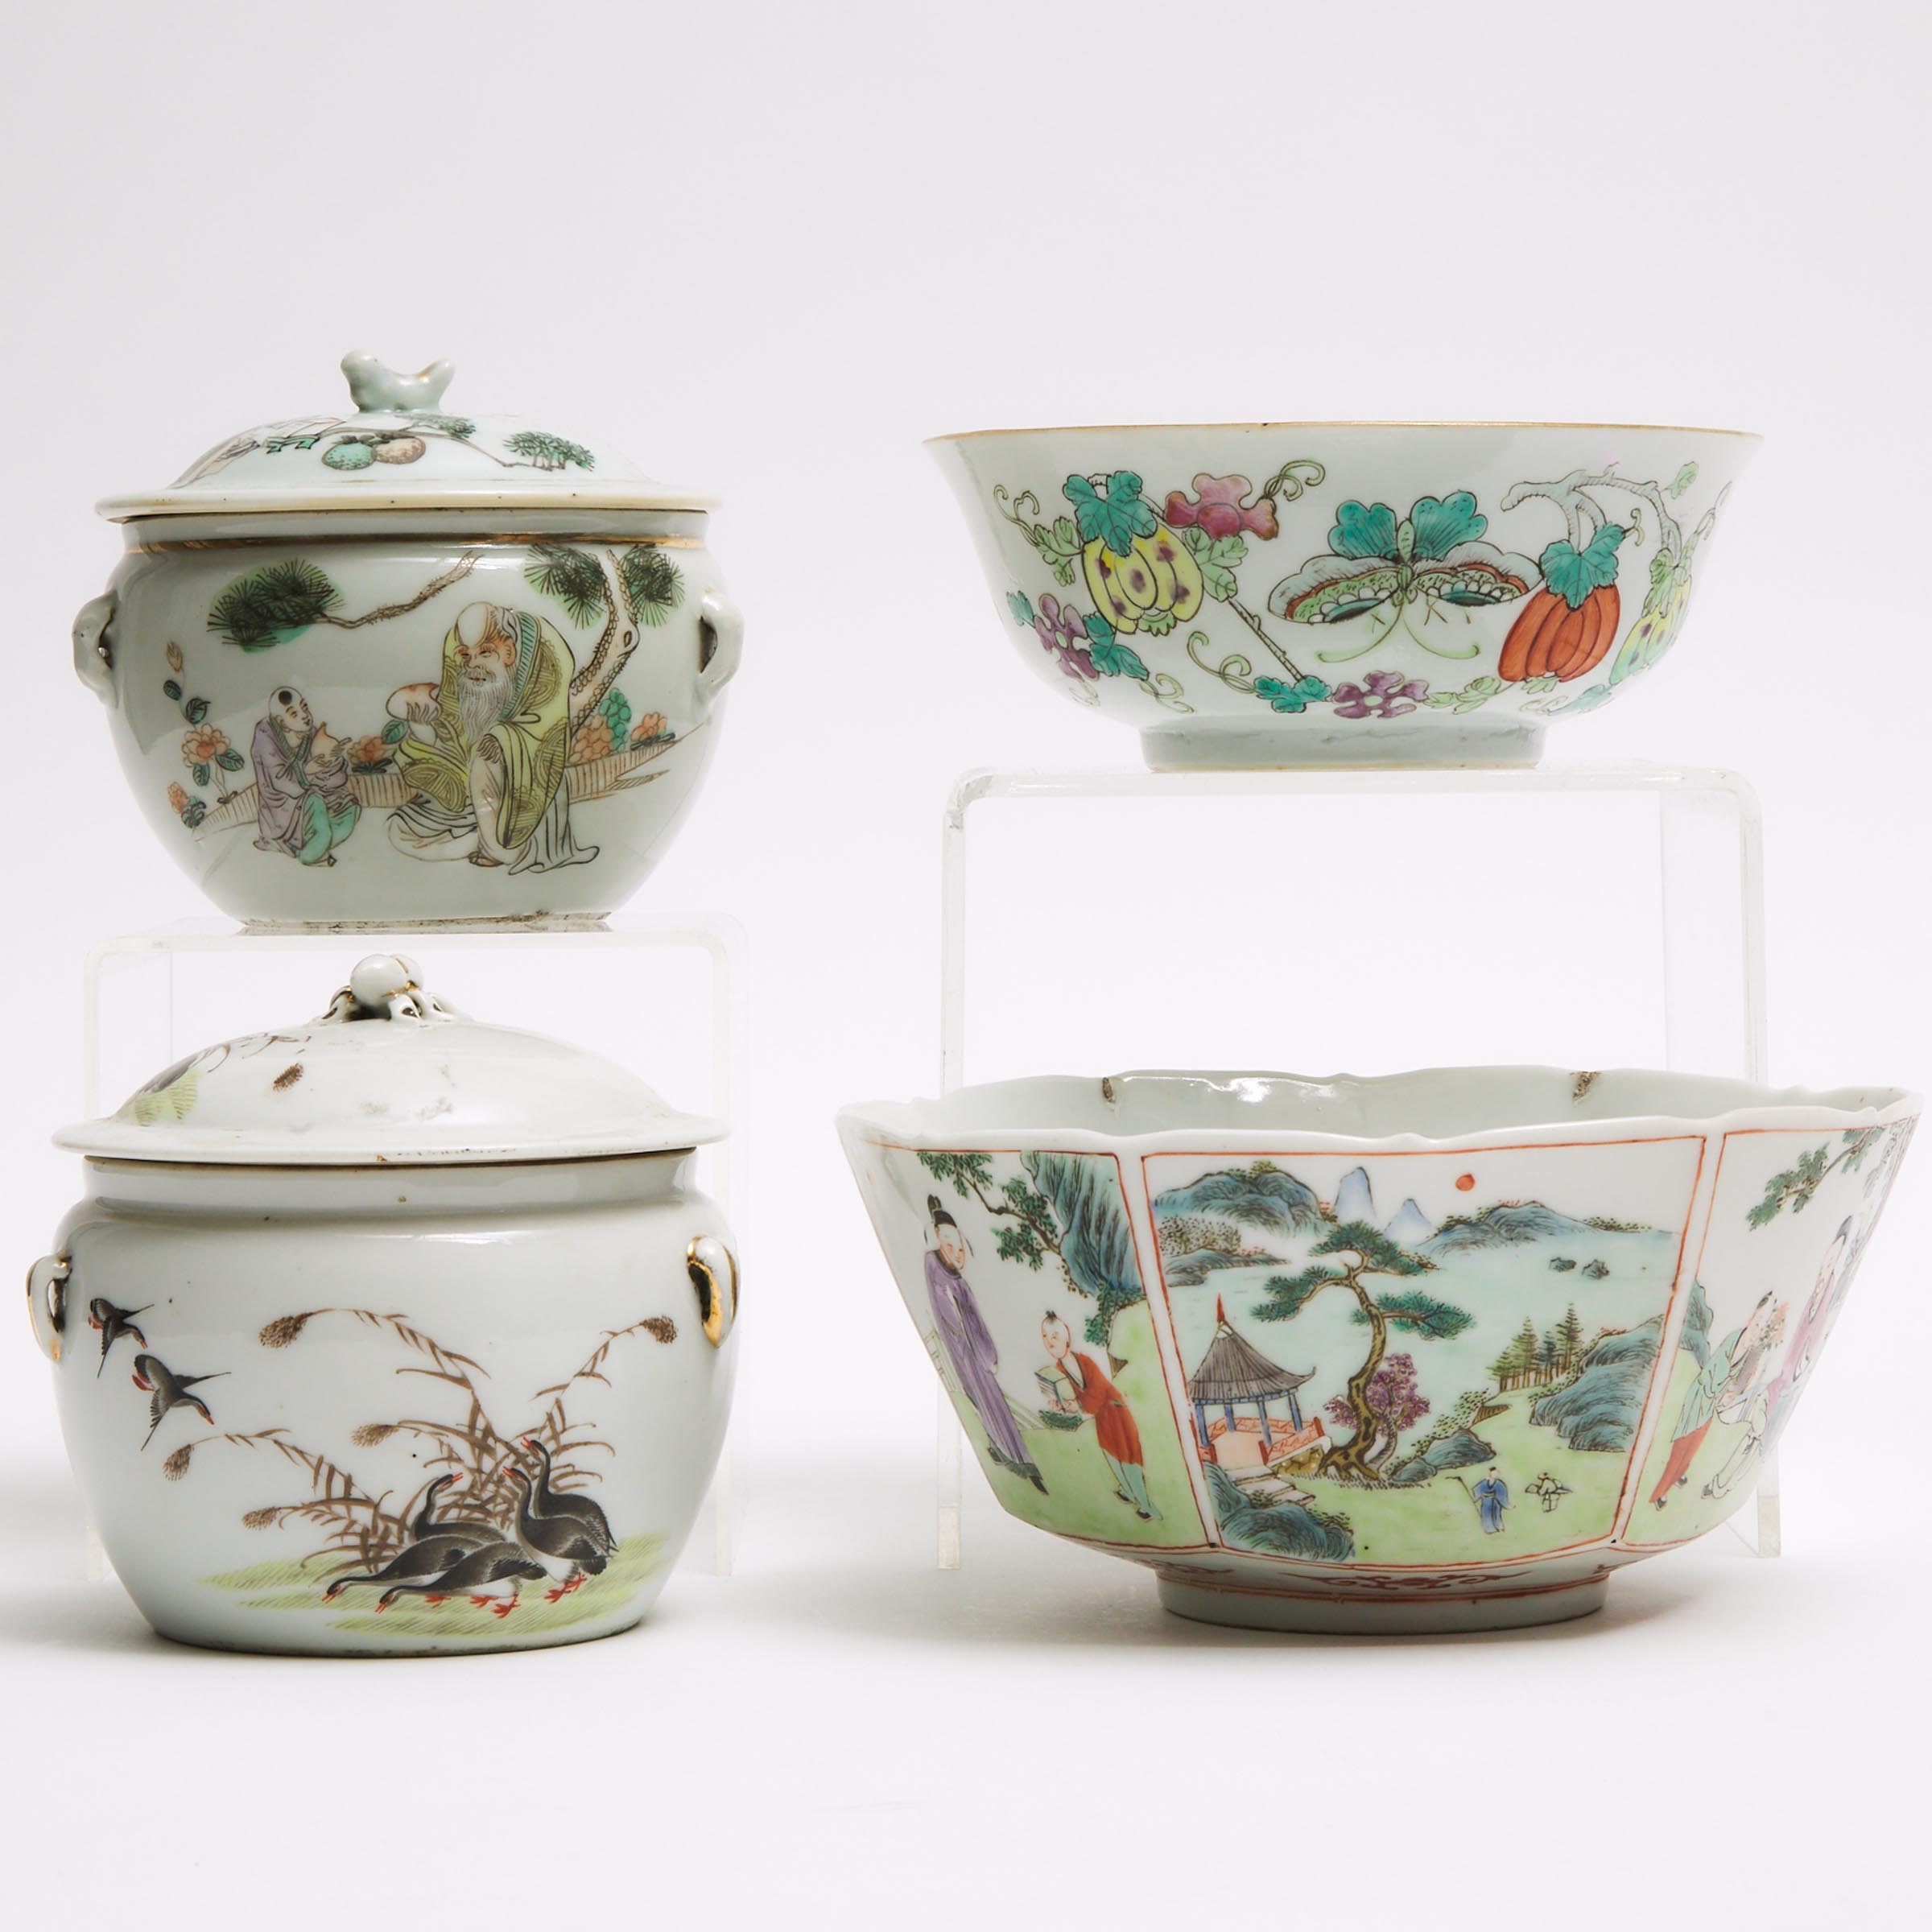 A Group of Four Chinese Enameled Porcelain Wares, 19th Century and Later